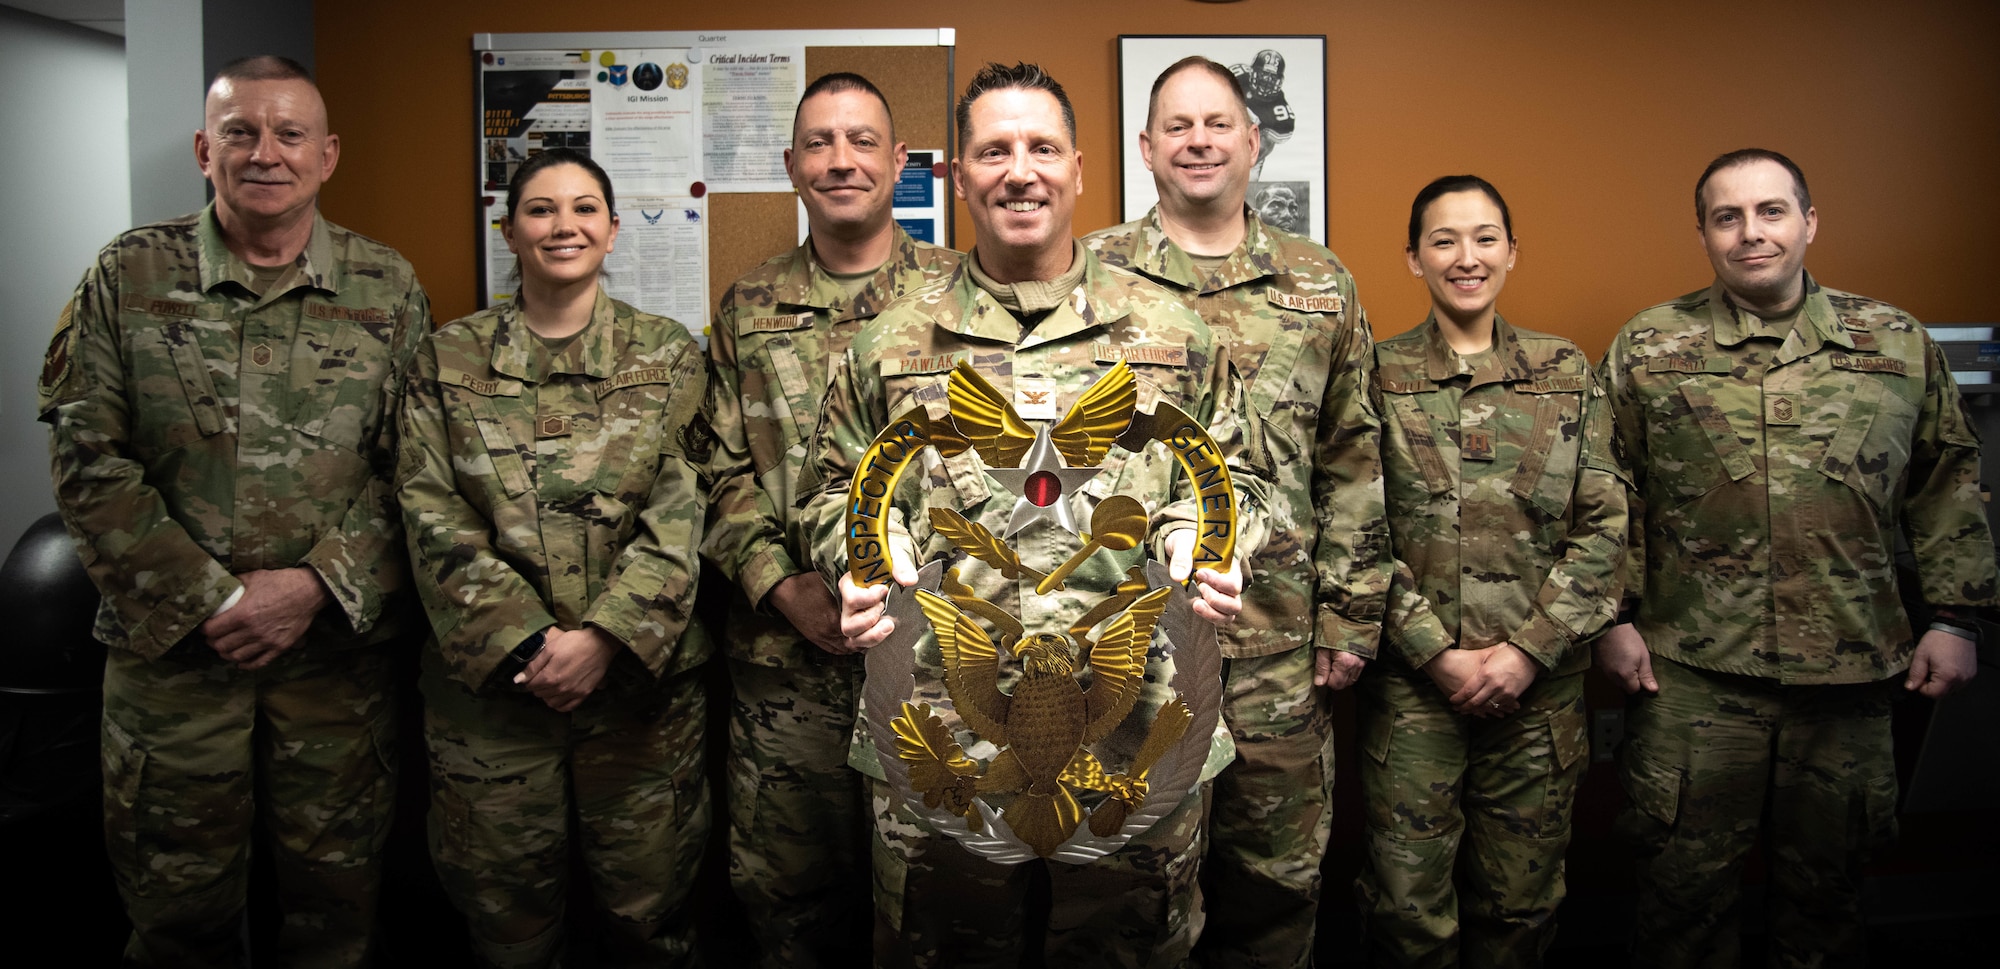 A group of seven Airmen stand in a row, holding a large metal badge in the center